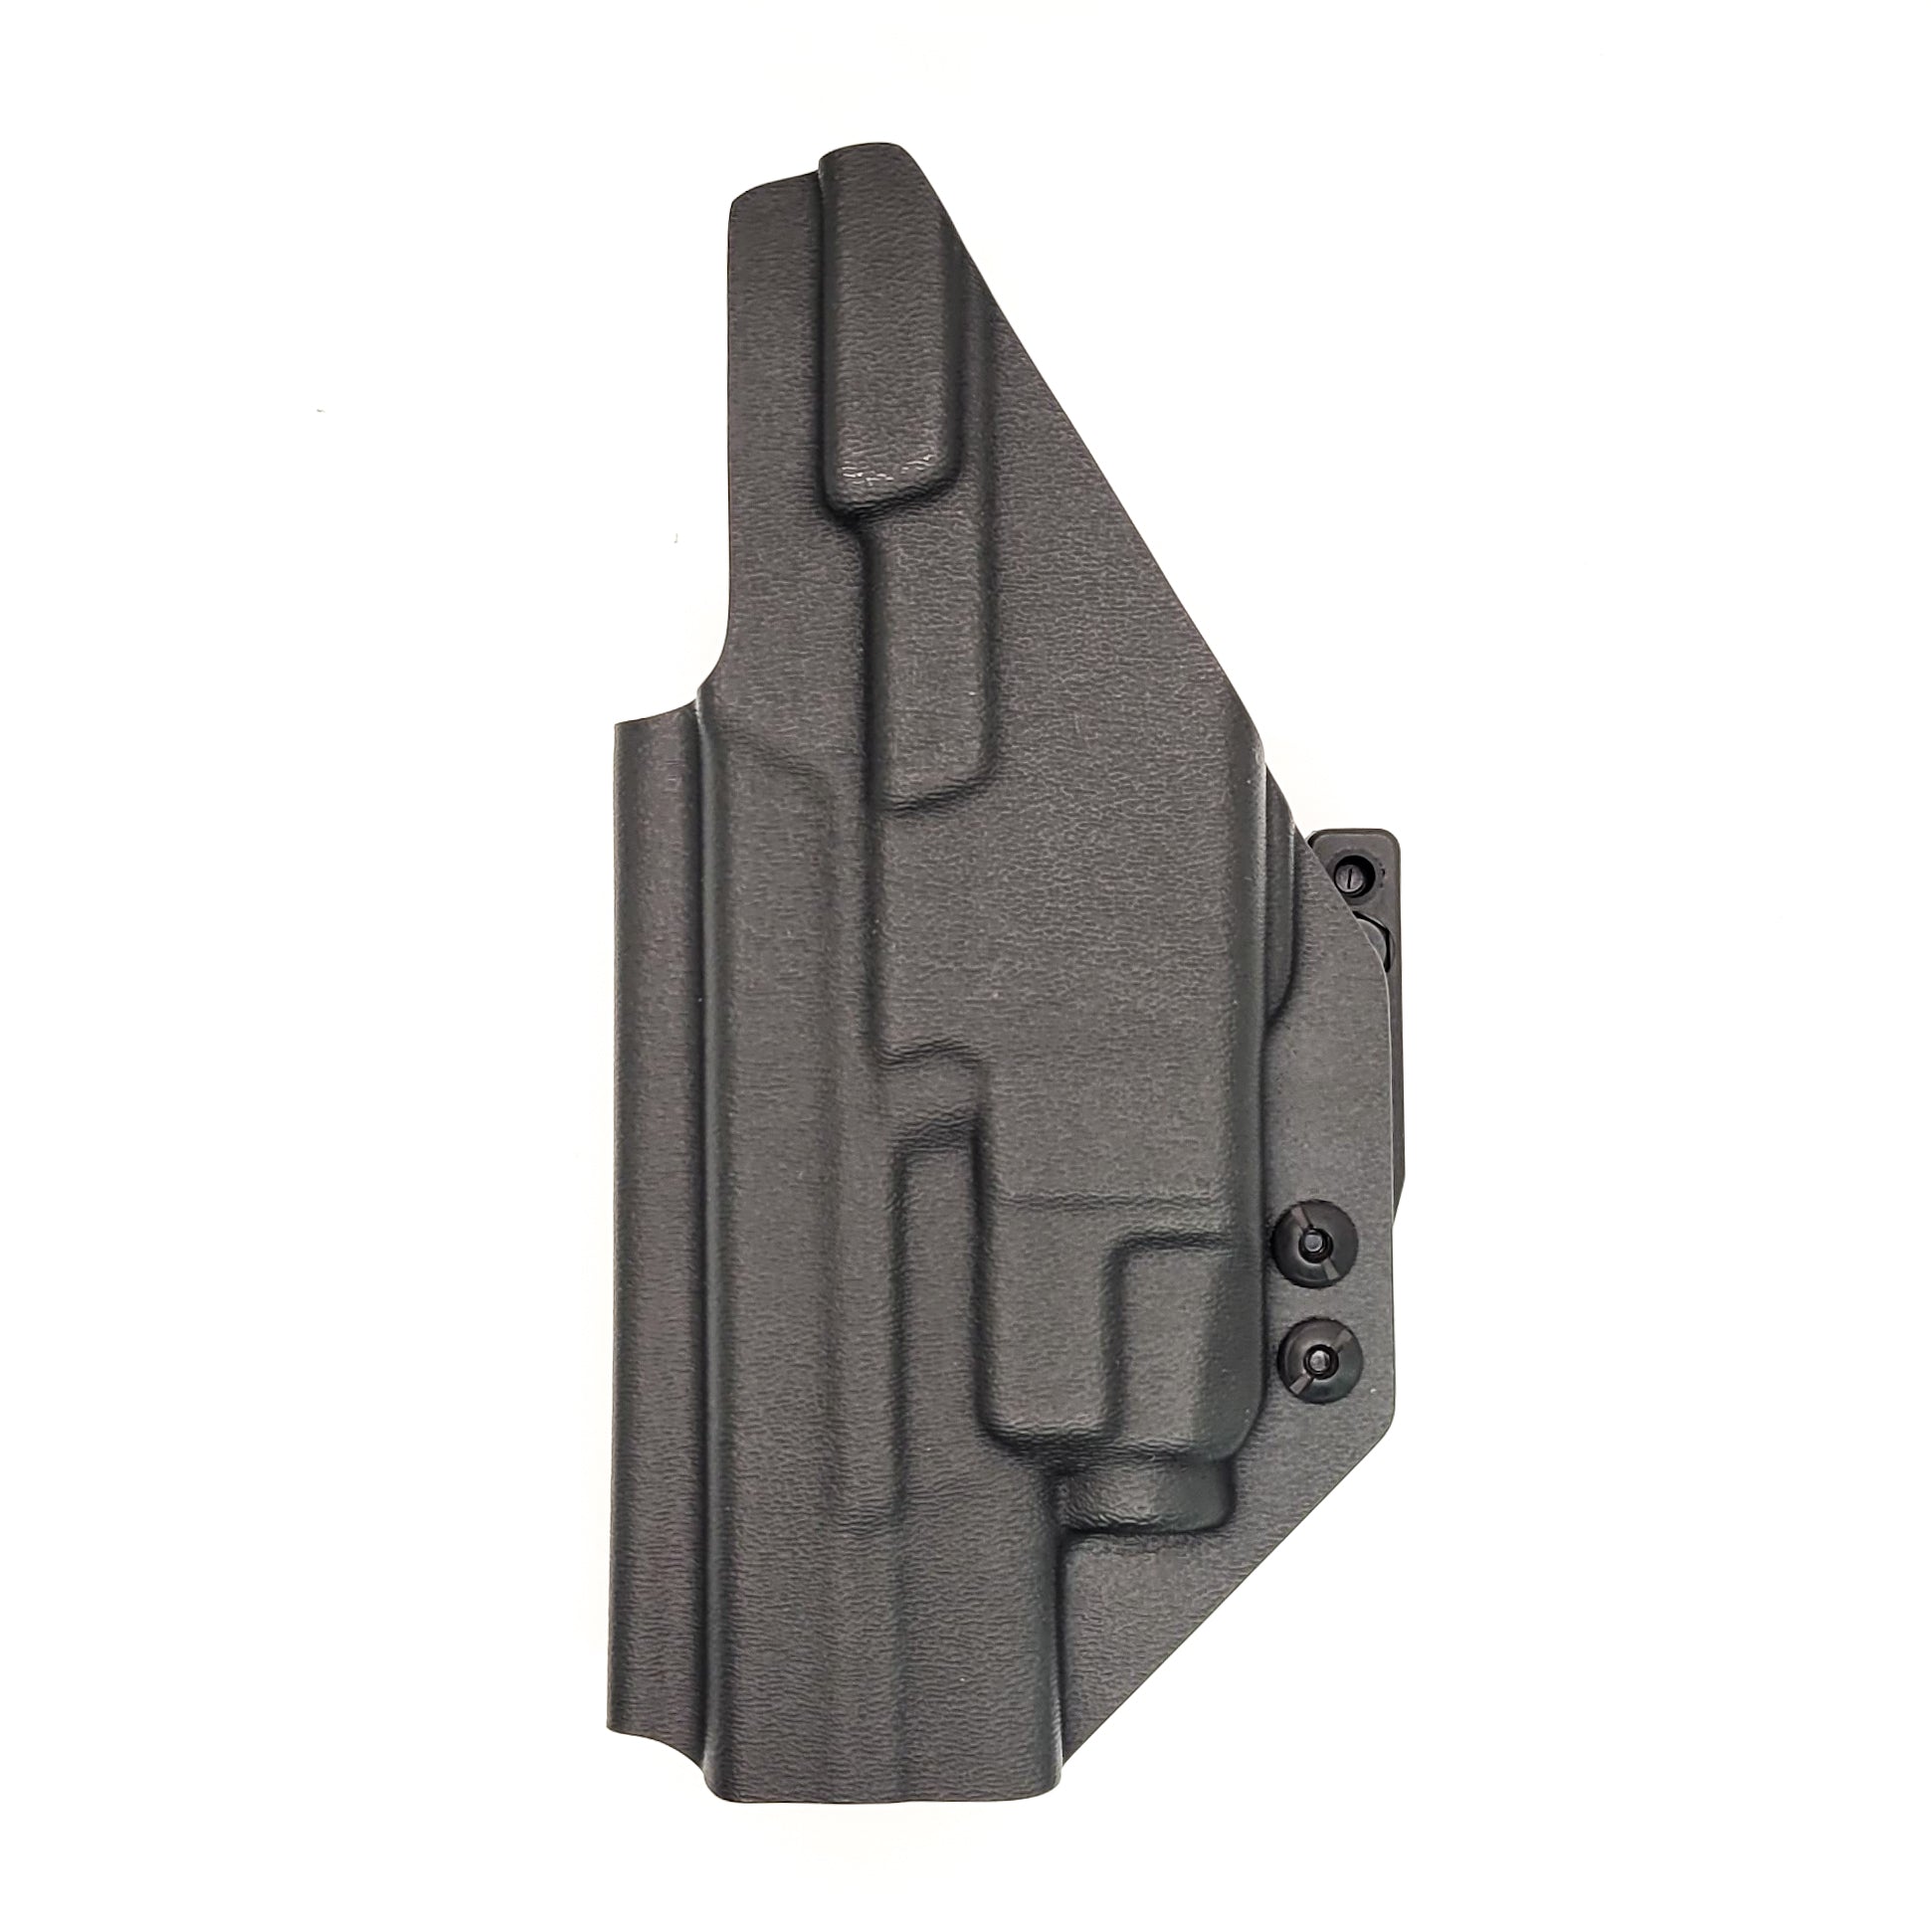 Inside Waistband IWB AIWB Kydex Holster designed to fit the Smith & Wesson M&P M2.0 5" pistols with the Streamlight TLR-7 or TLR-7A light mounted to the pistol. Full sweat guard, adjustable retention, minimal material, and smooth edges to reduce printing. Cleared for red dot sights. Proudly made in the USA.